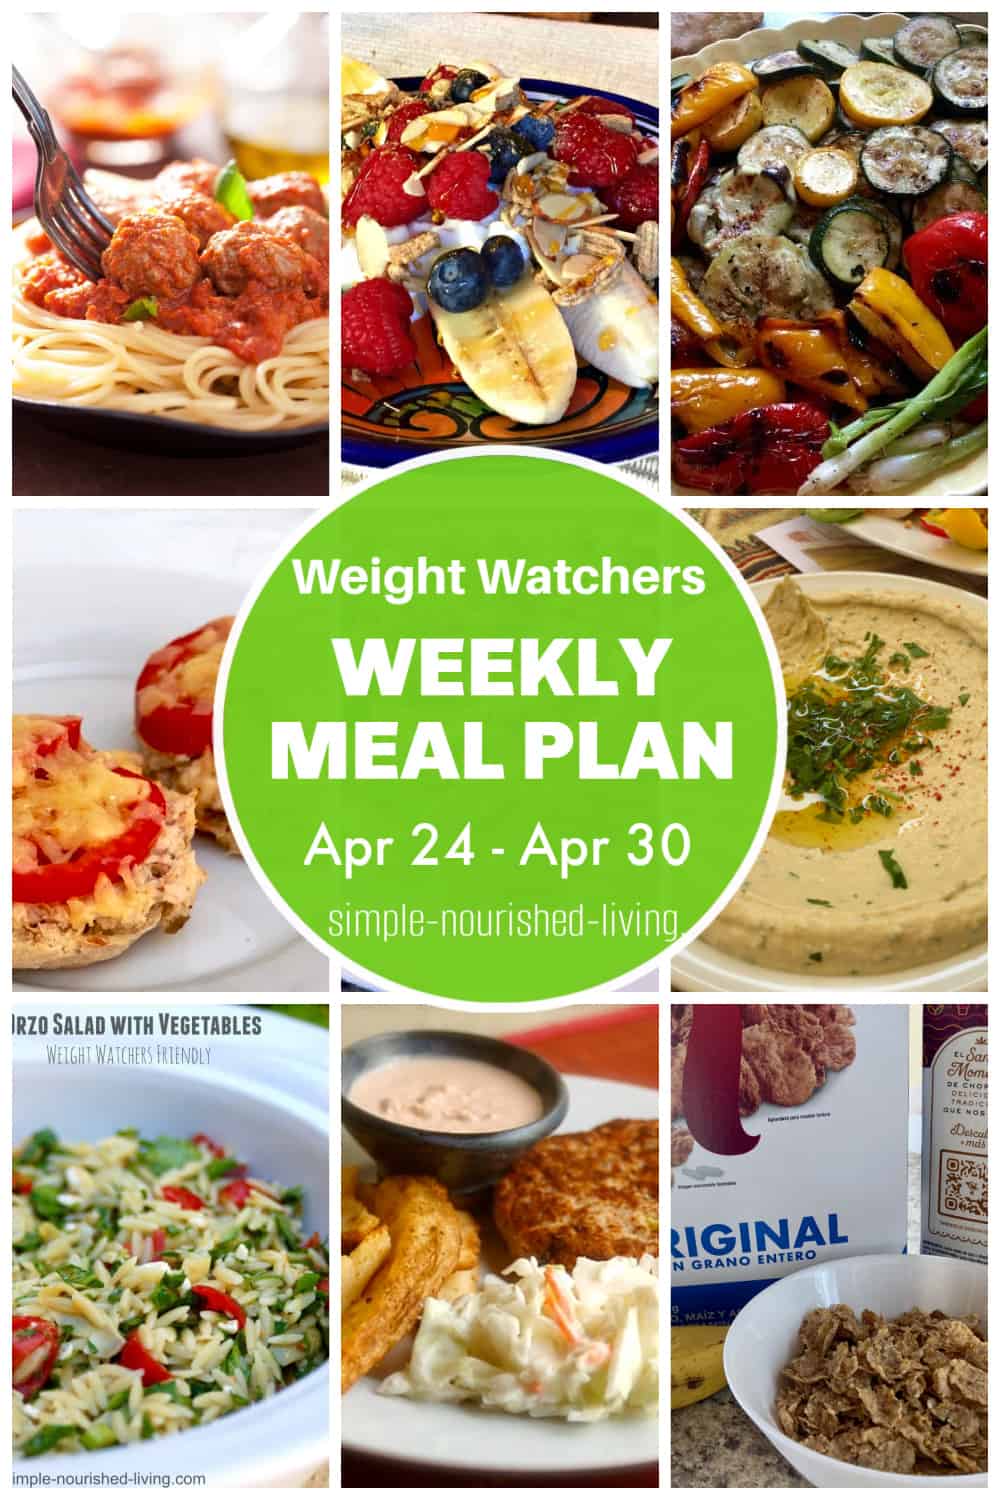 WW Weekly Meal Plan Photo Collage featuring spaghetti and meatballs, cottage cheese banana split, grilled vegetables, english muffin tuna melt, hummus, orzo salad, salmon patties, special k cereal 